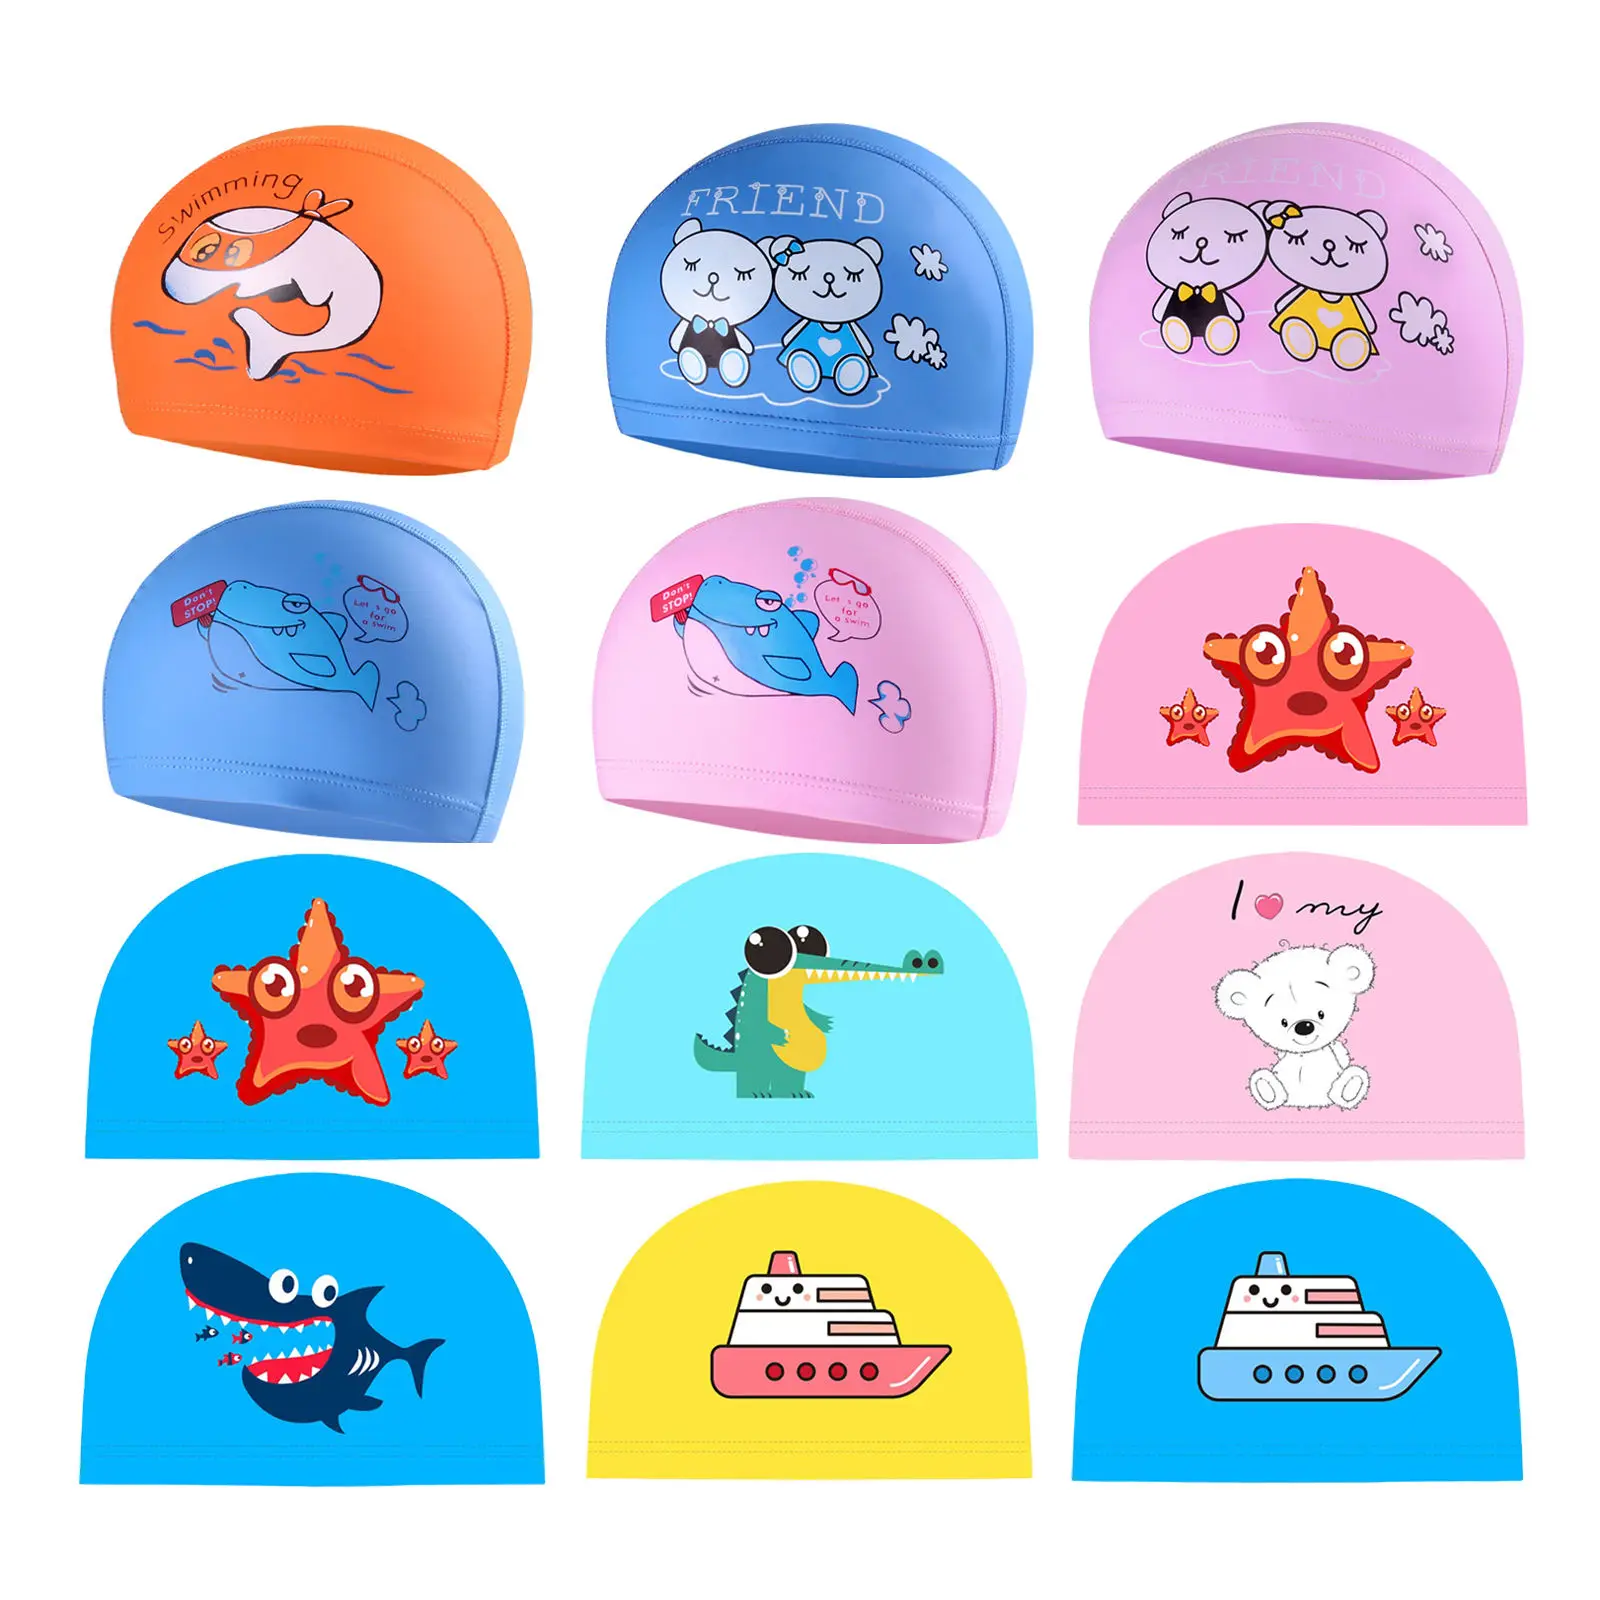 Durable PU Kids Swim s, Waterproof Aged 2-8 Children Baby Elastic Bathing s for Long and Short Hair Swimming Hat Ear Protector